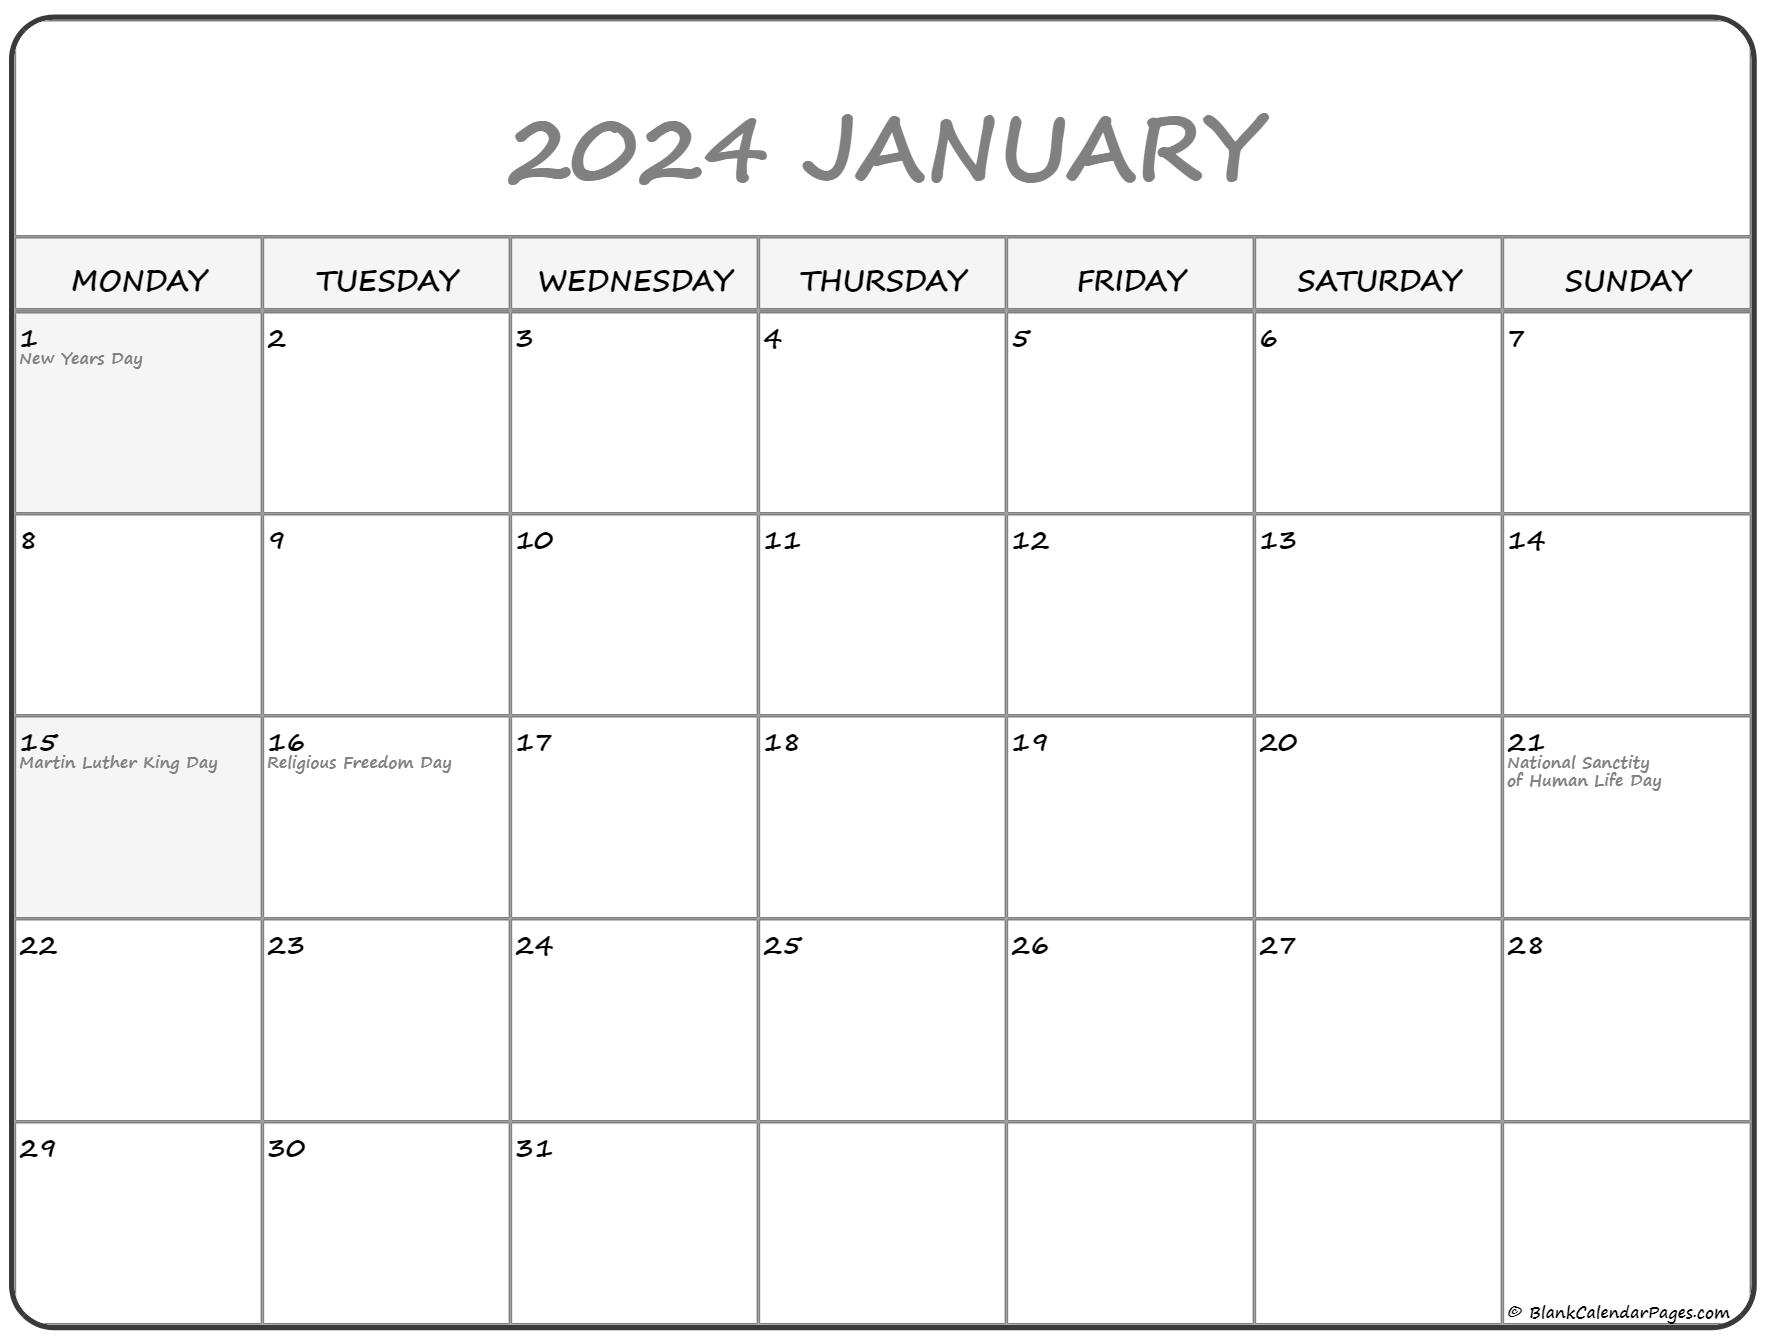 January 2024 Monday Calendar | Monday To Sunday intended for Free Printable Calendar 2024 Monday Star